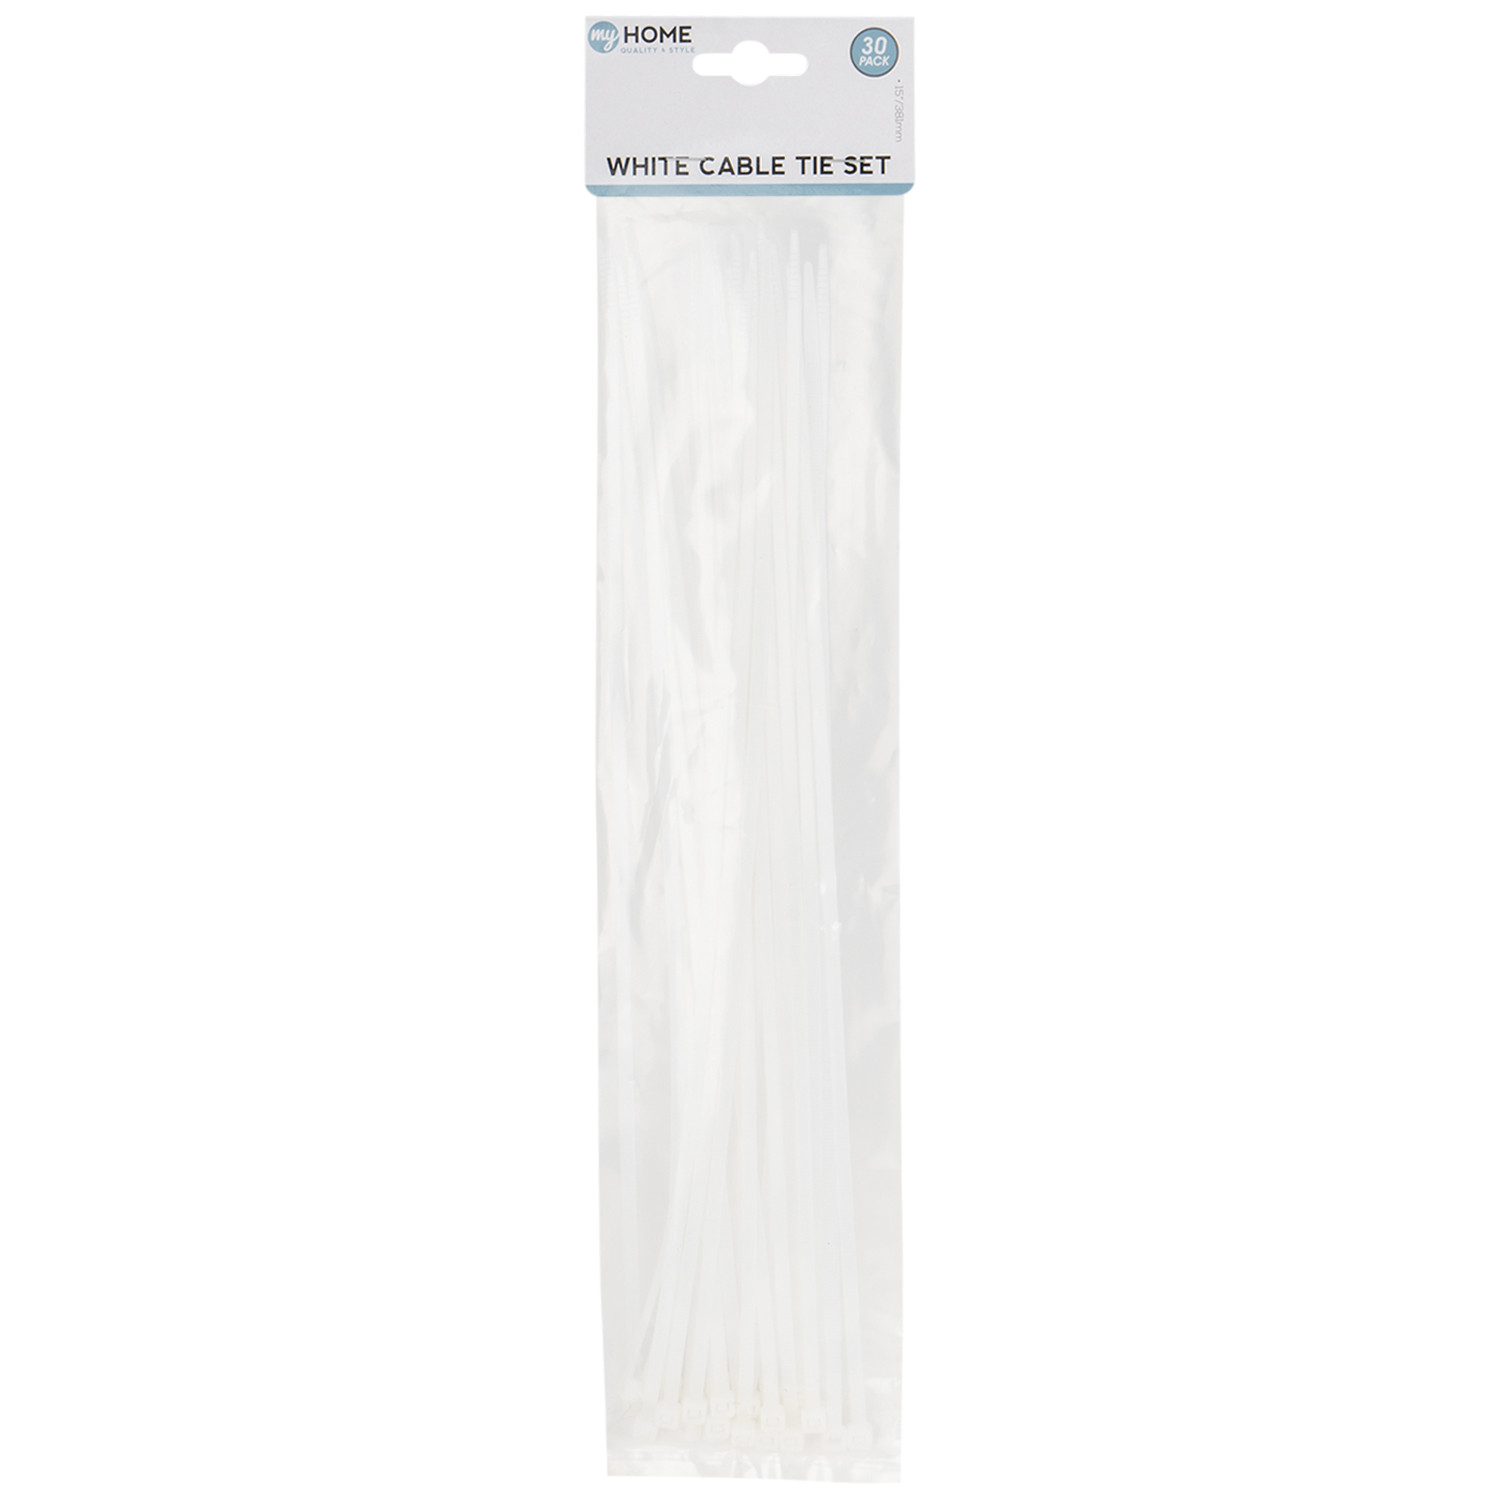 My Home White Cable Tie Set 30 Pack Image